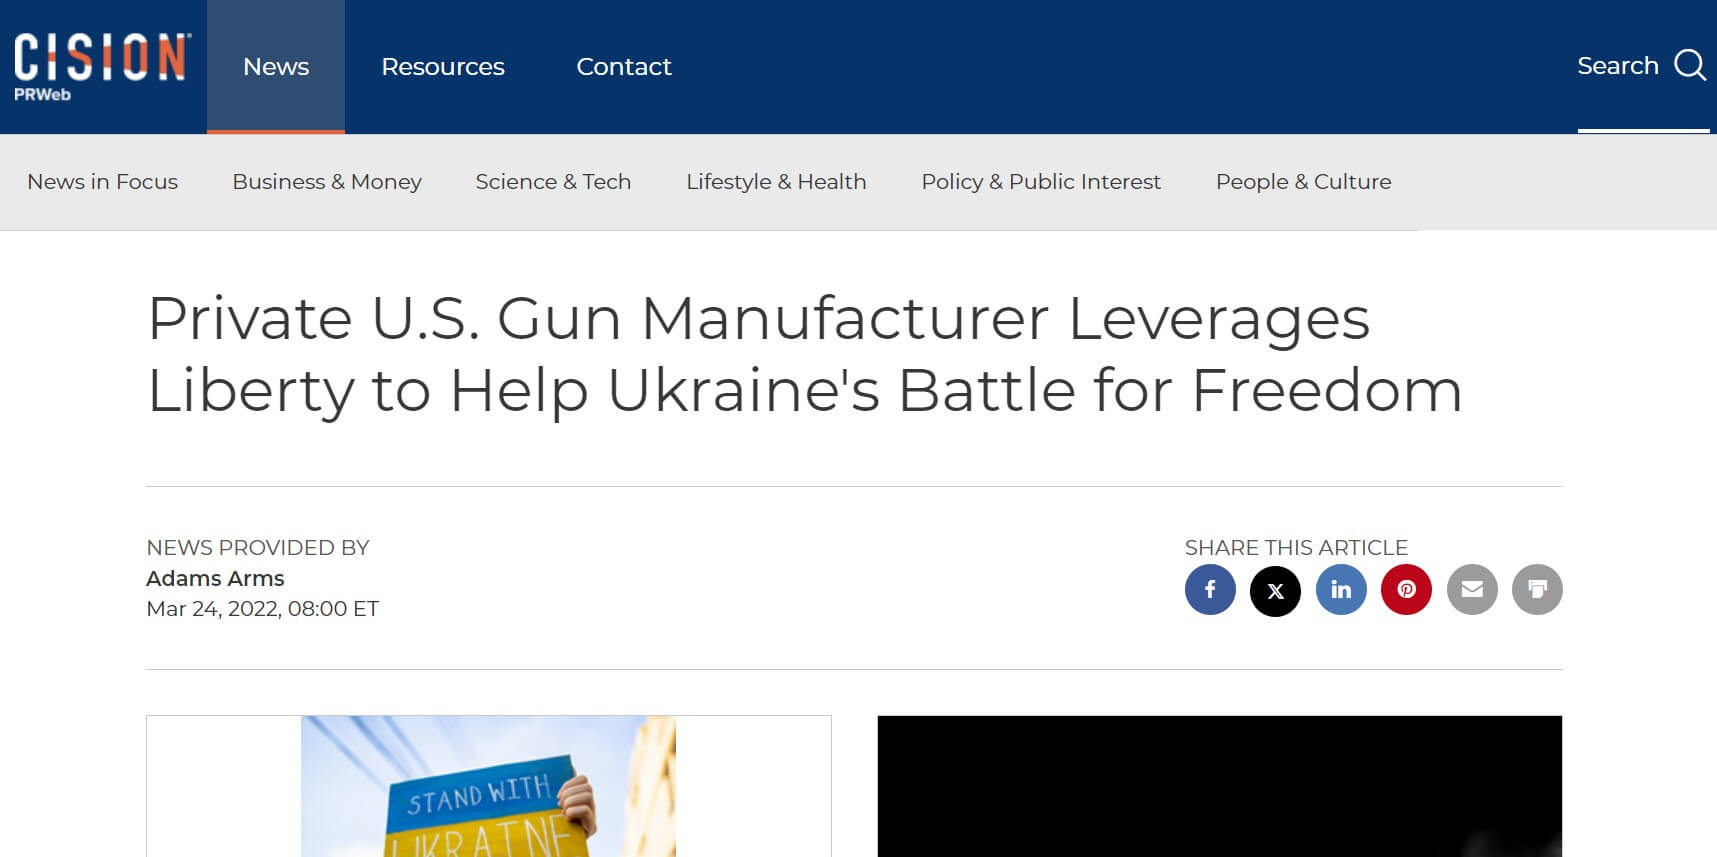 Cision News Article: "Private U.S. Gun Manufacturer Leverages Liberty to Help Ukraine's Battle for Freedom